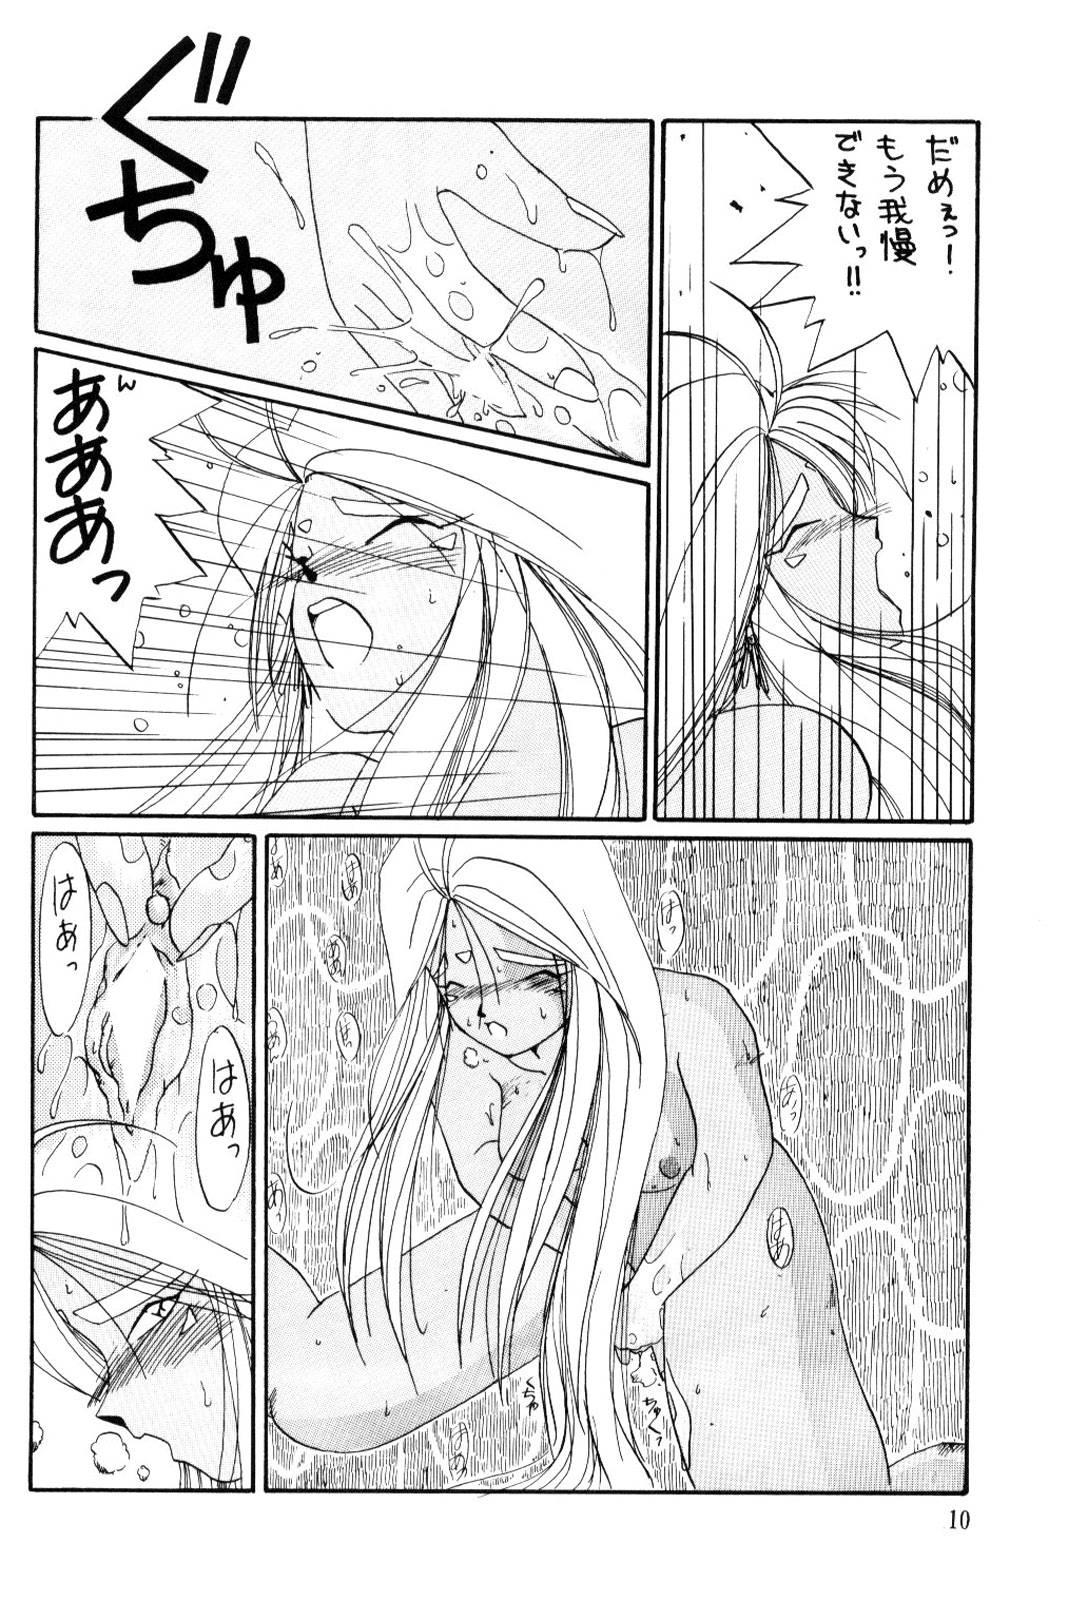 Party Urd Special - Ah my goddess Trans - Page 11